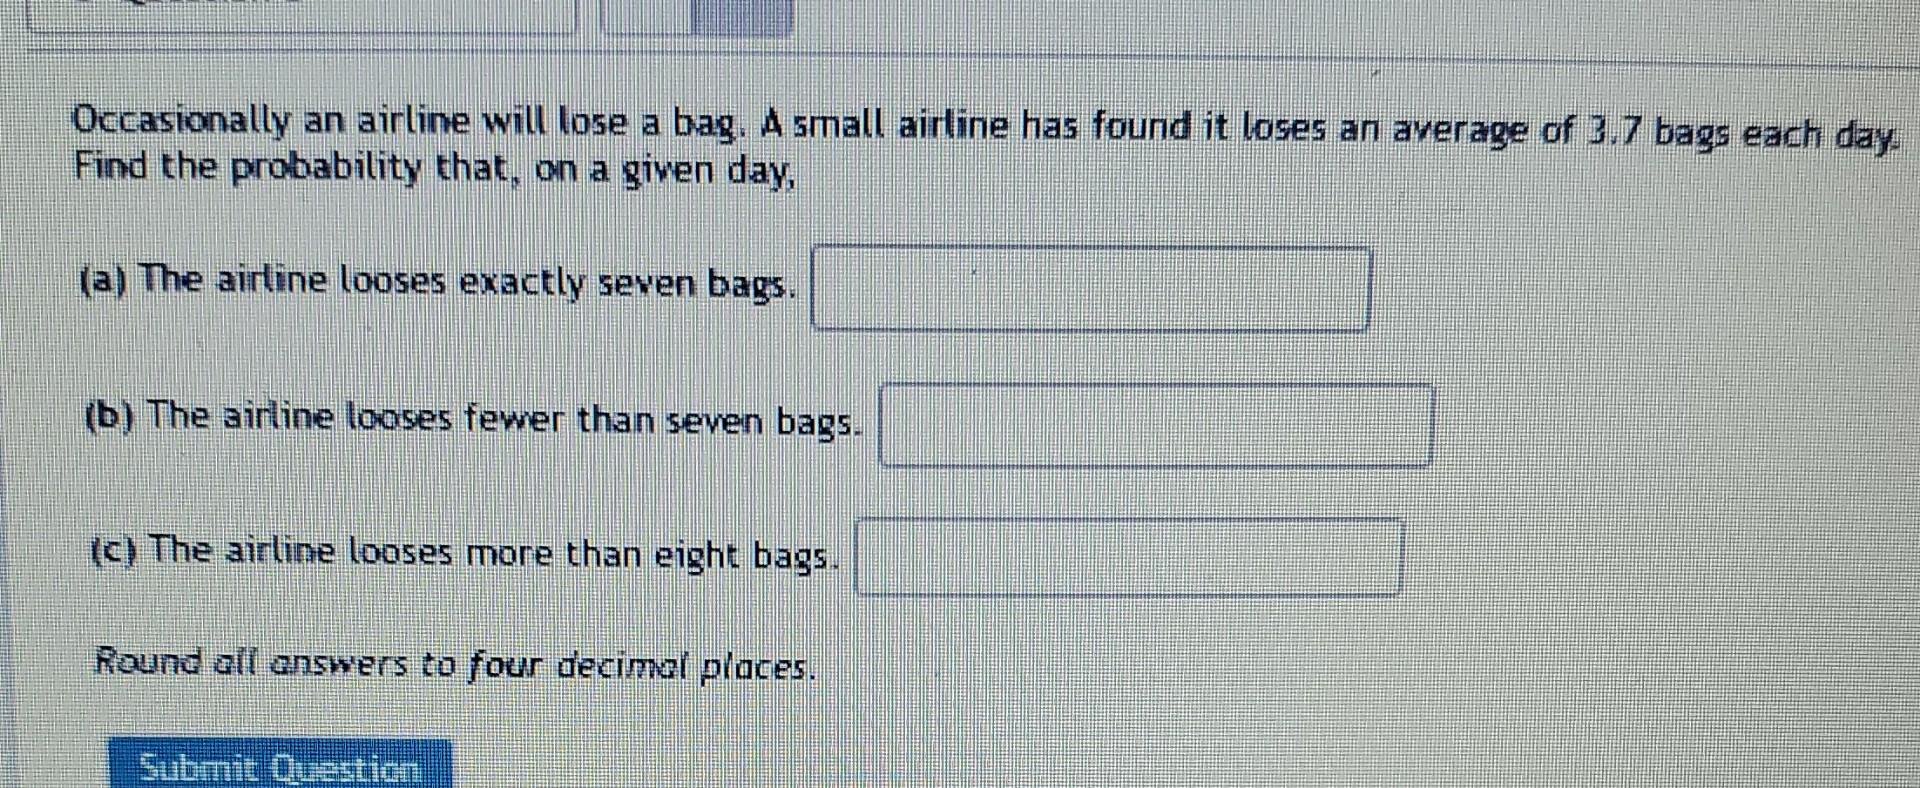 Occasionally an airline will lose a bag. A small airline has found it loses an average of 3.7 bags each day. Find the probabi